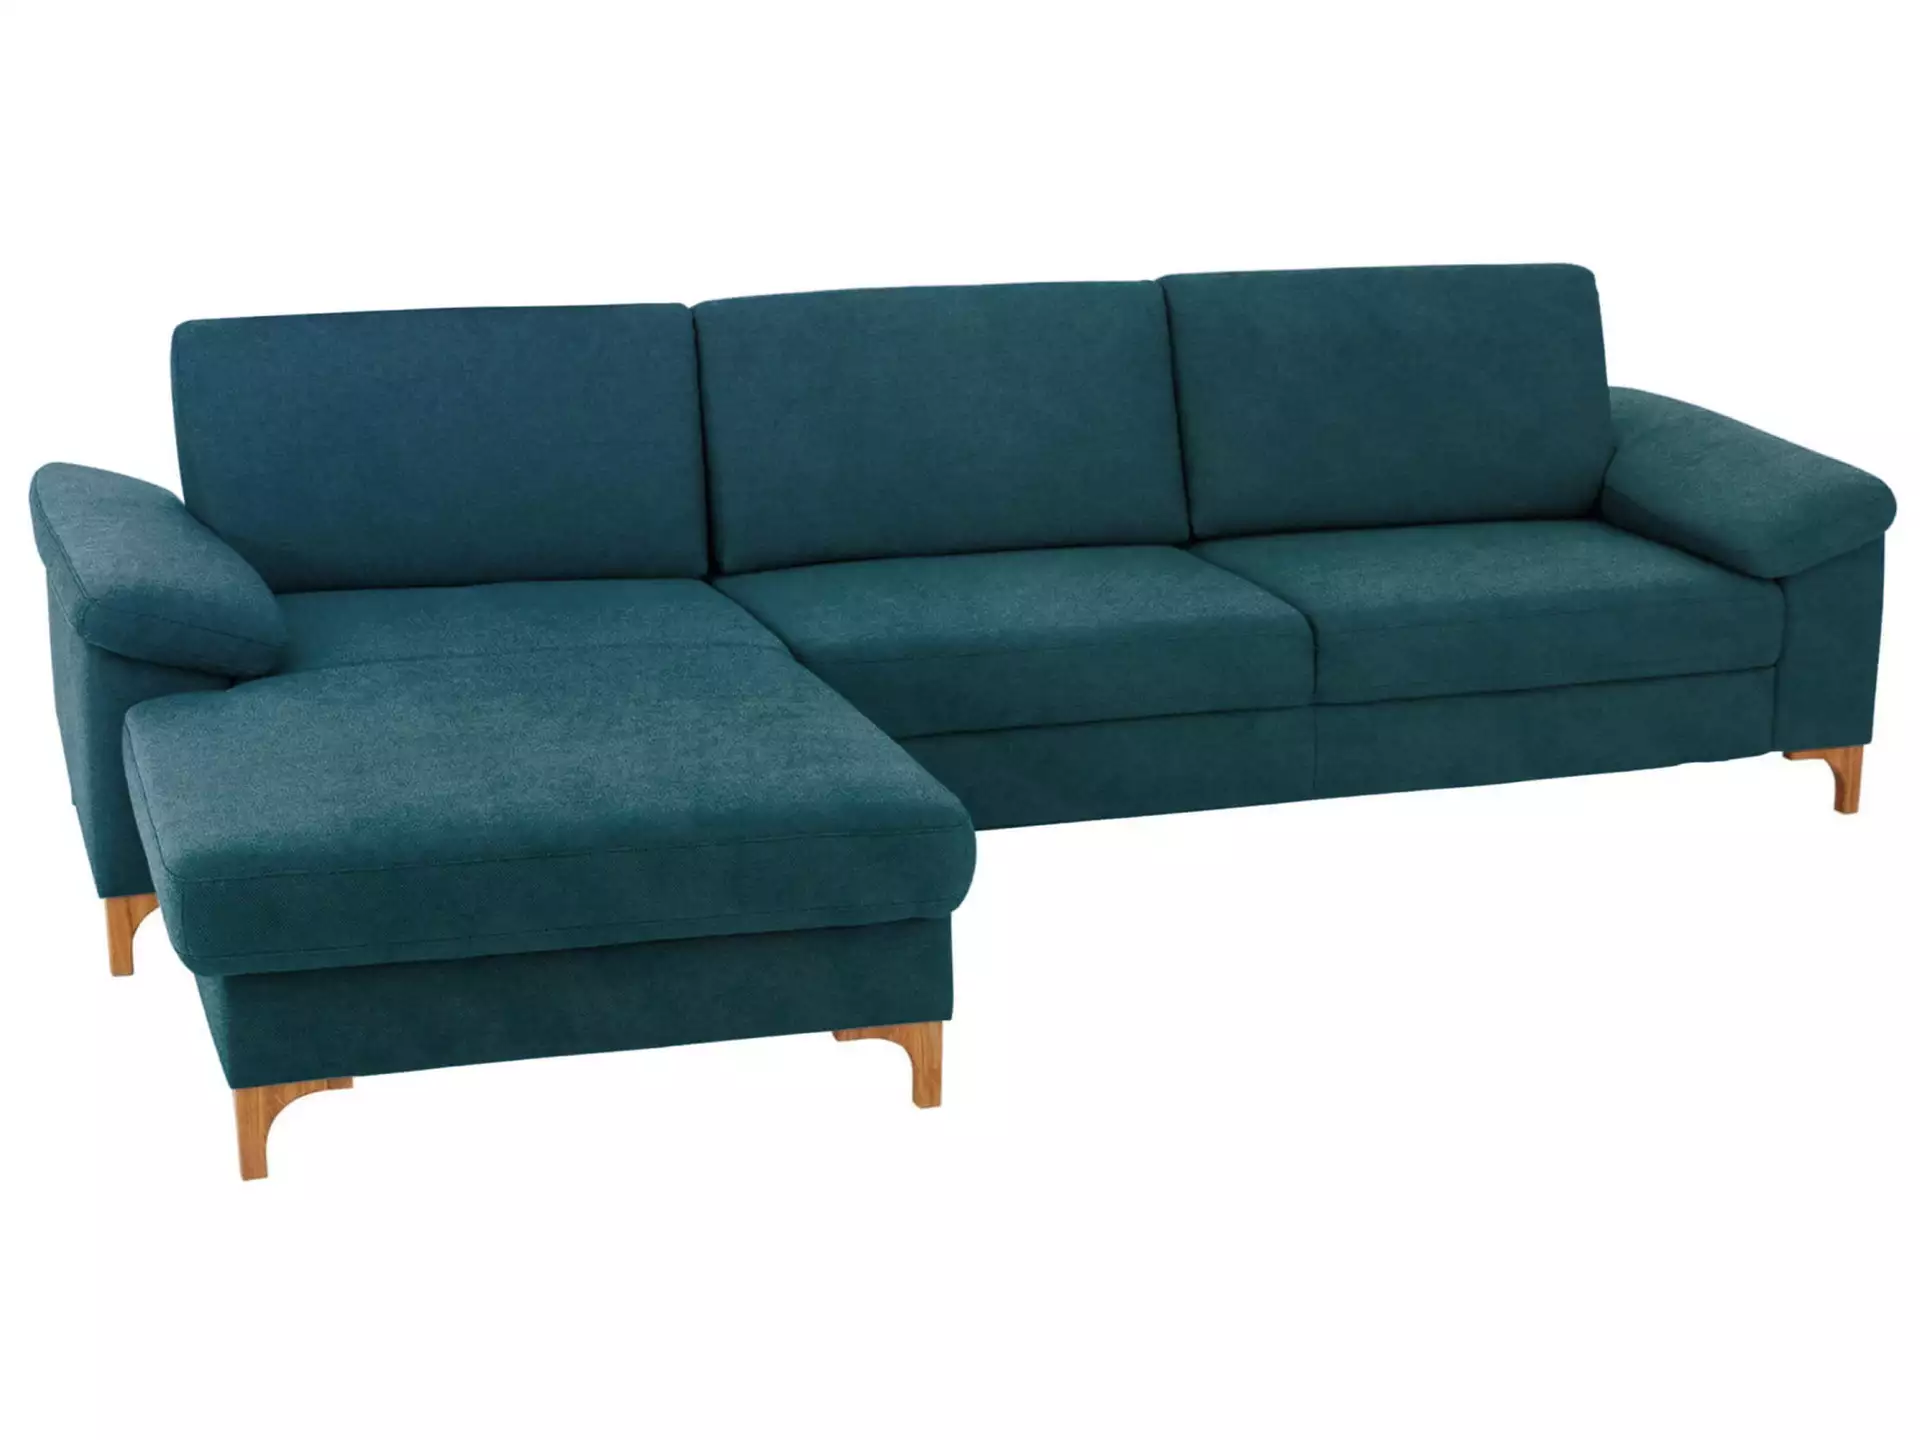 Ecksofa Coventry Basic Candy / Farbe: Petrol / Material: Stoff Basic